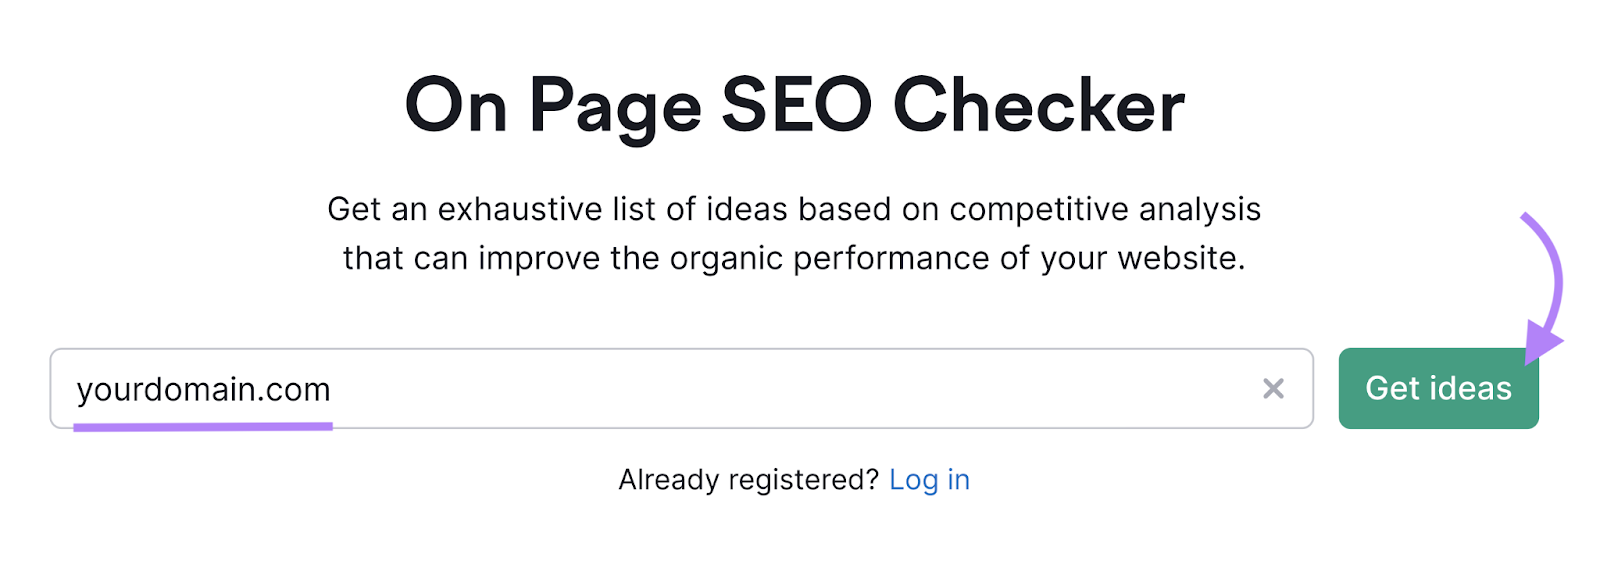 on page seo checker tool start